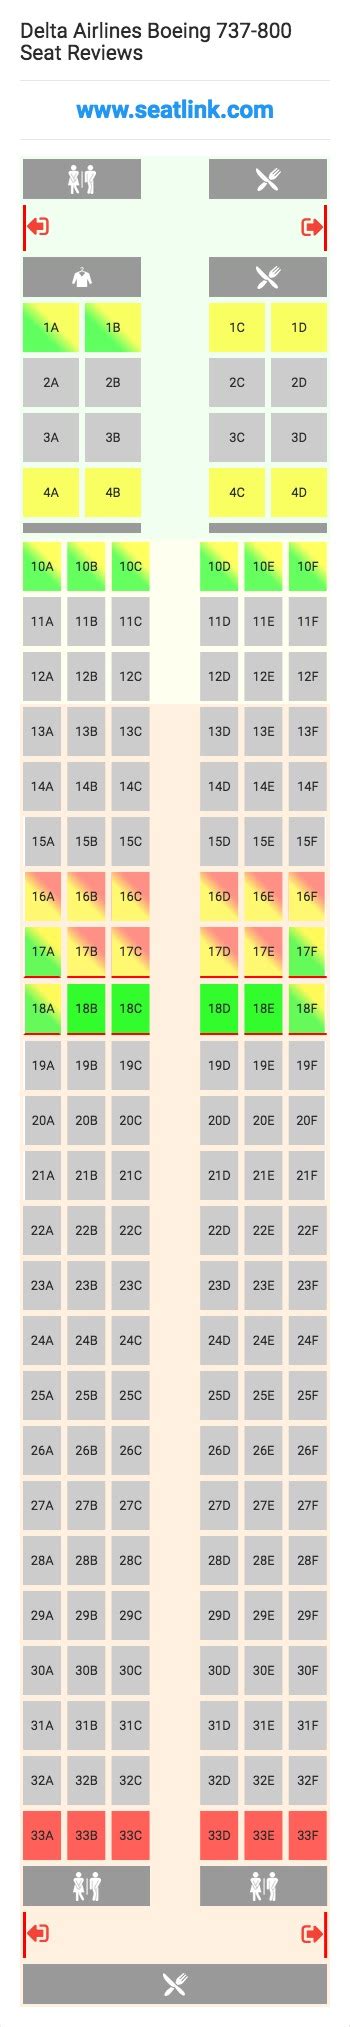 Delta Airlines Aircraft Seating Charts Elcho Table